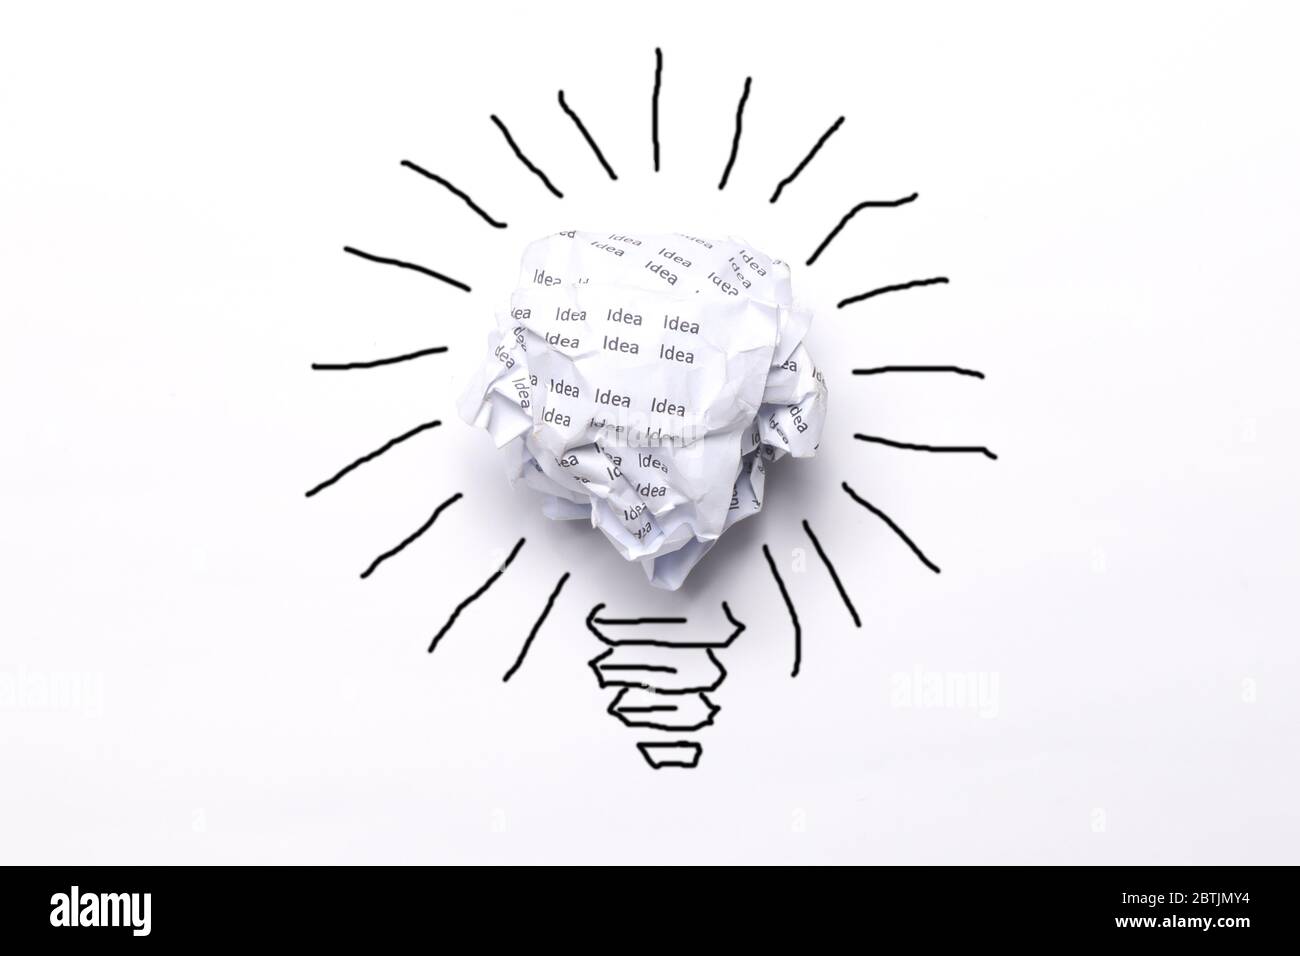 Creativity inspiration, ideas concepts with light bulb from white paper crumpled ball Stock Photo